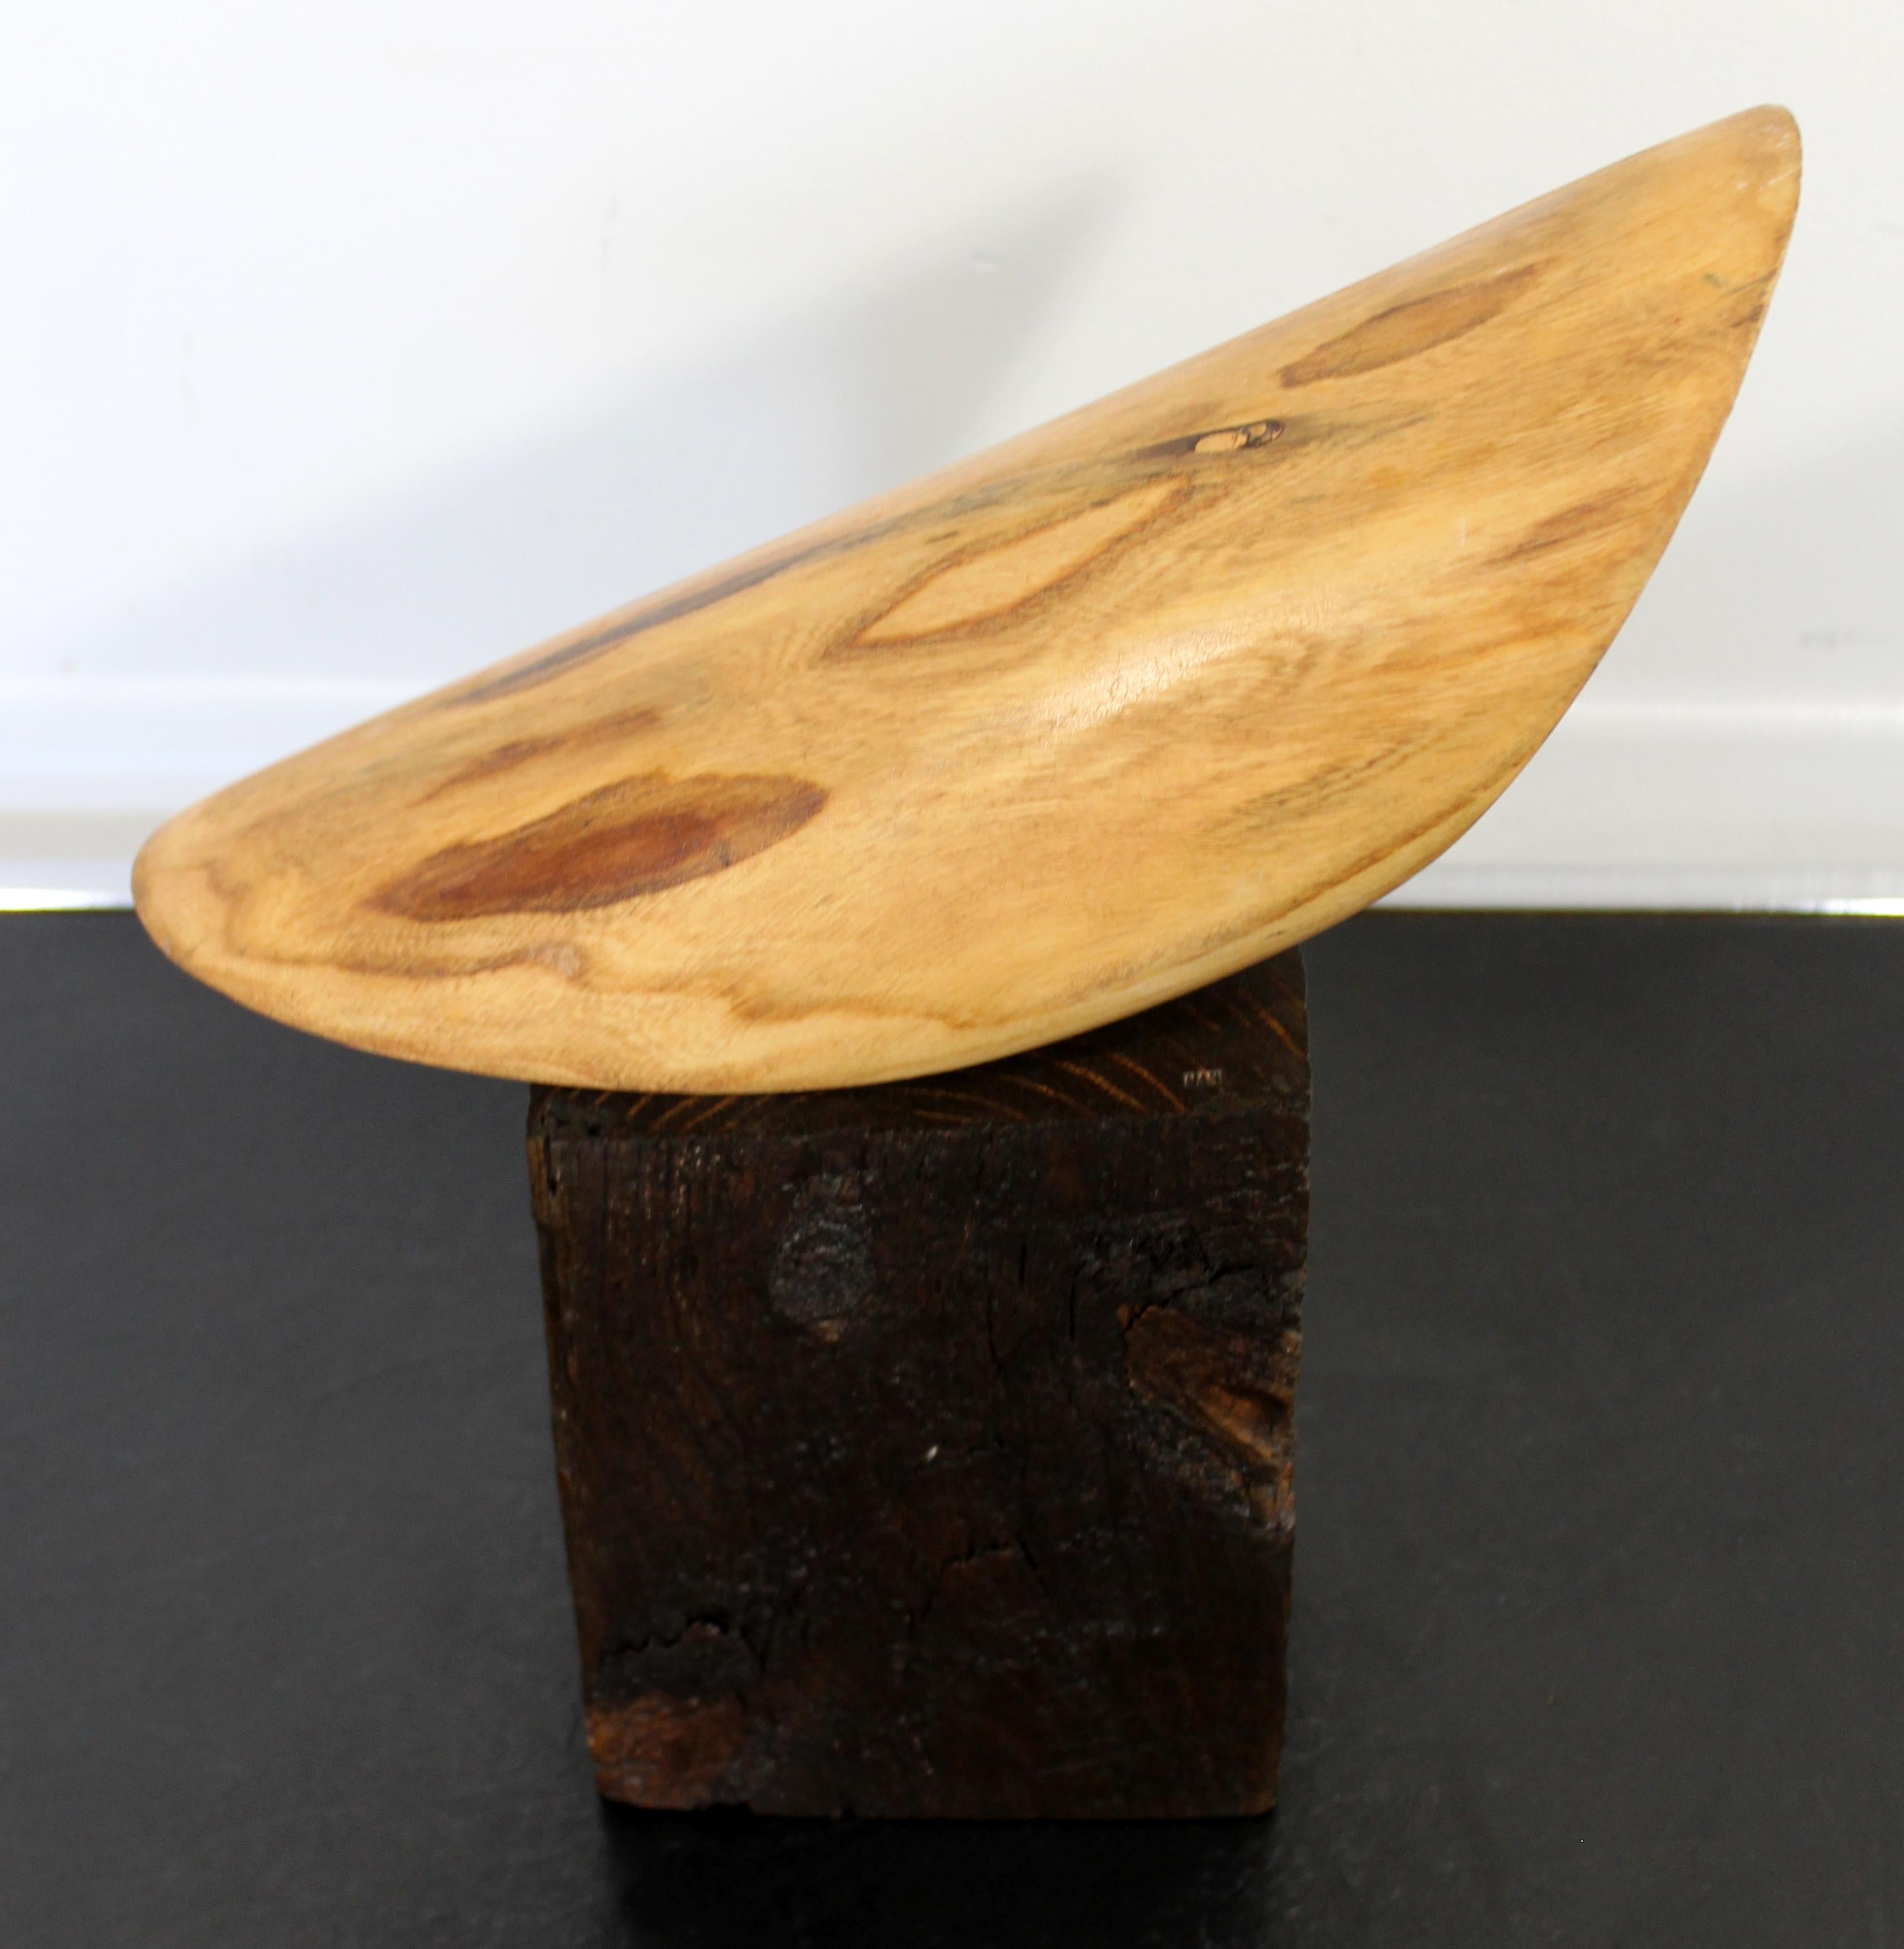 For your consideration is a stunning modern wood semicircular sculpture titled 